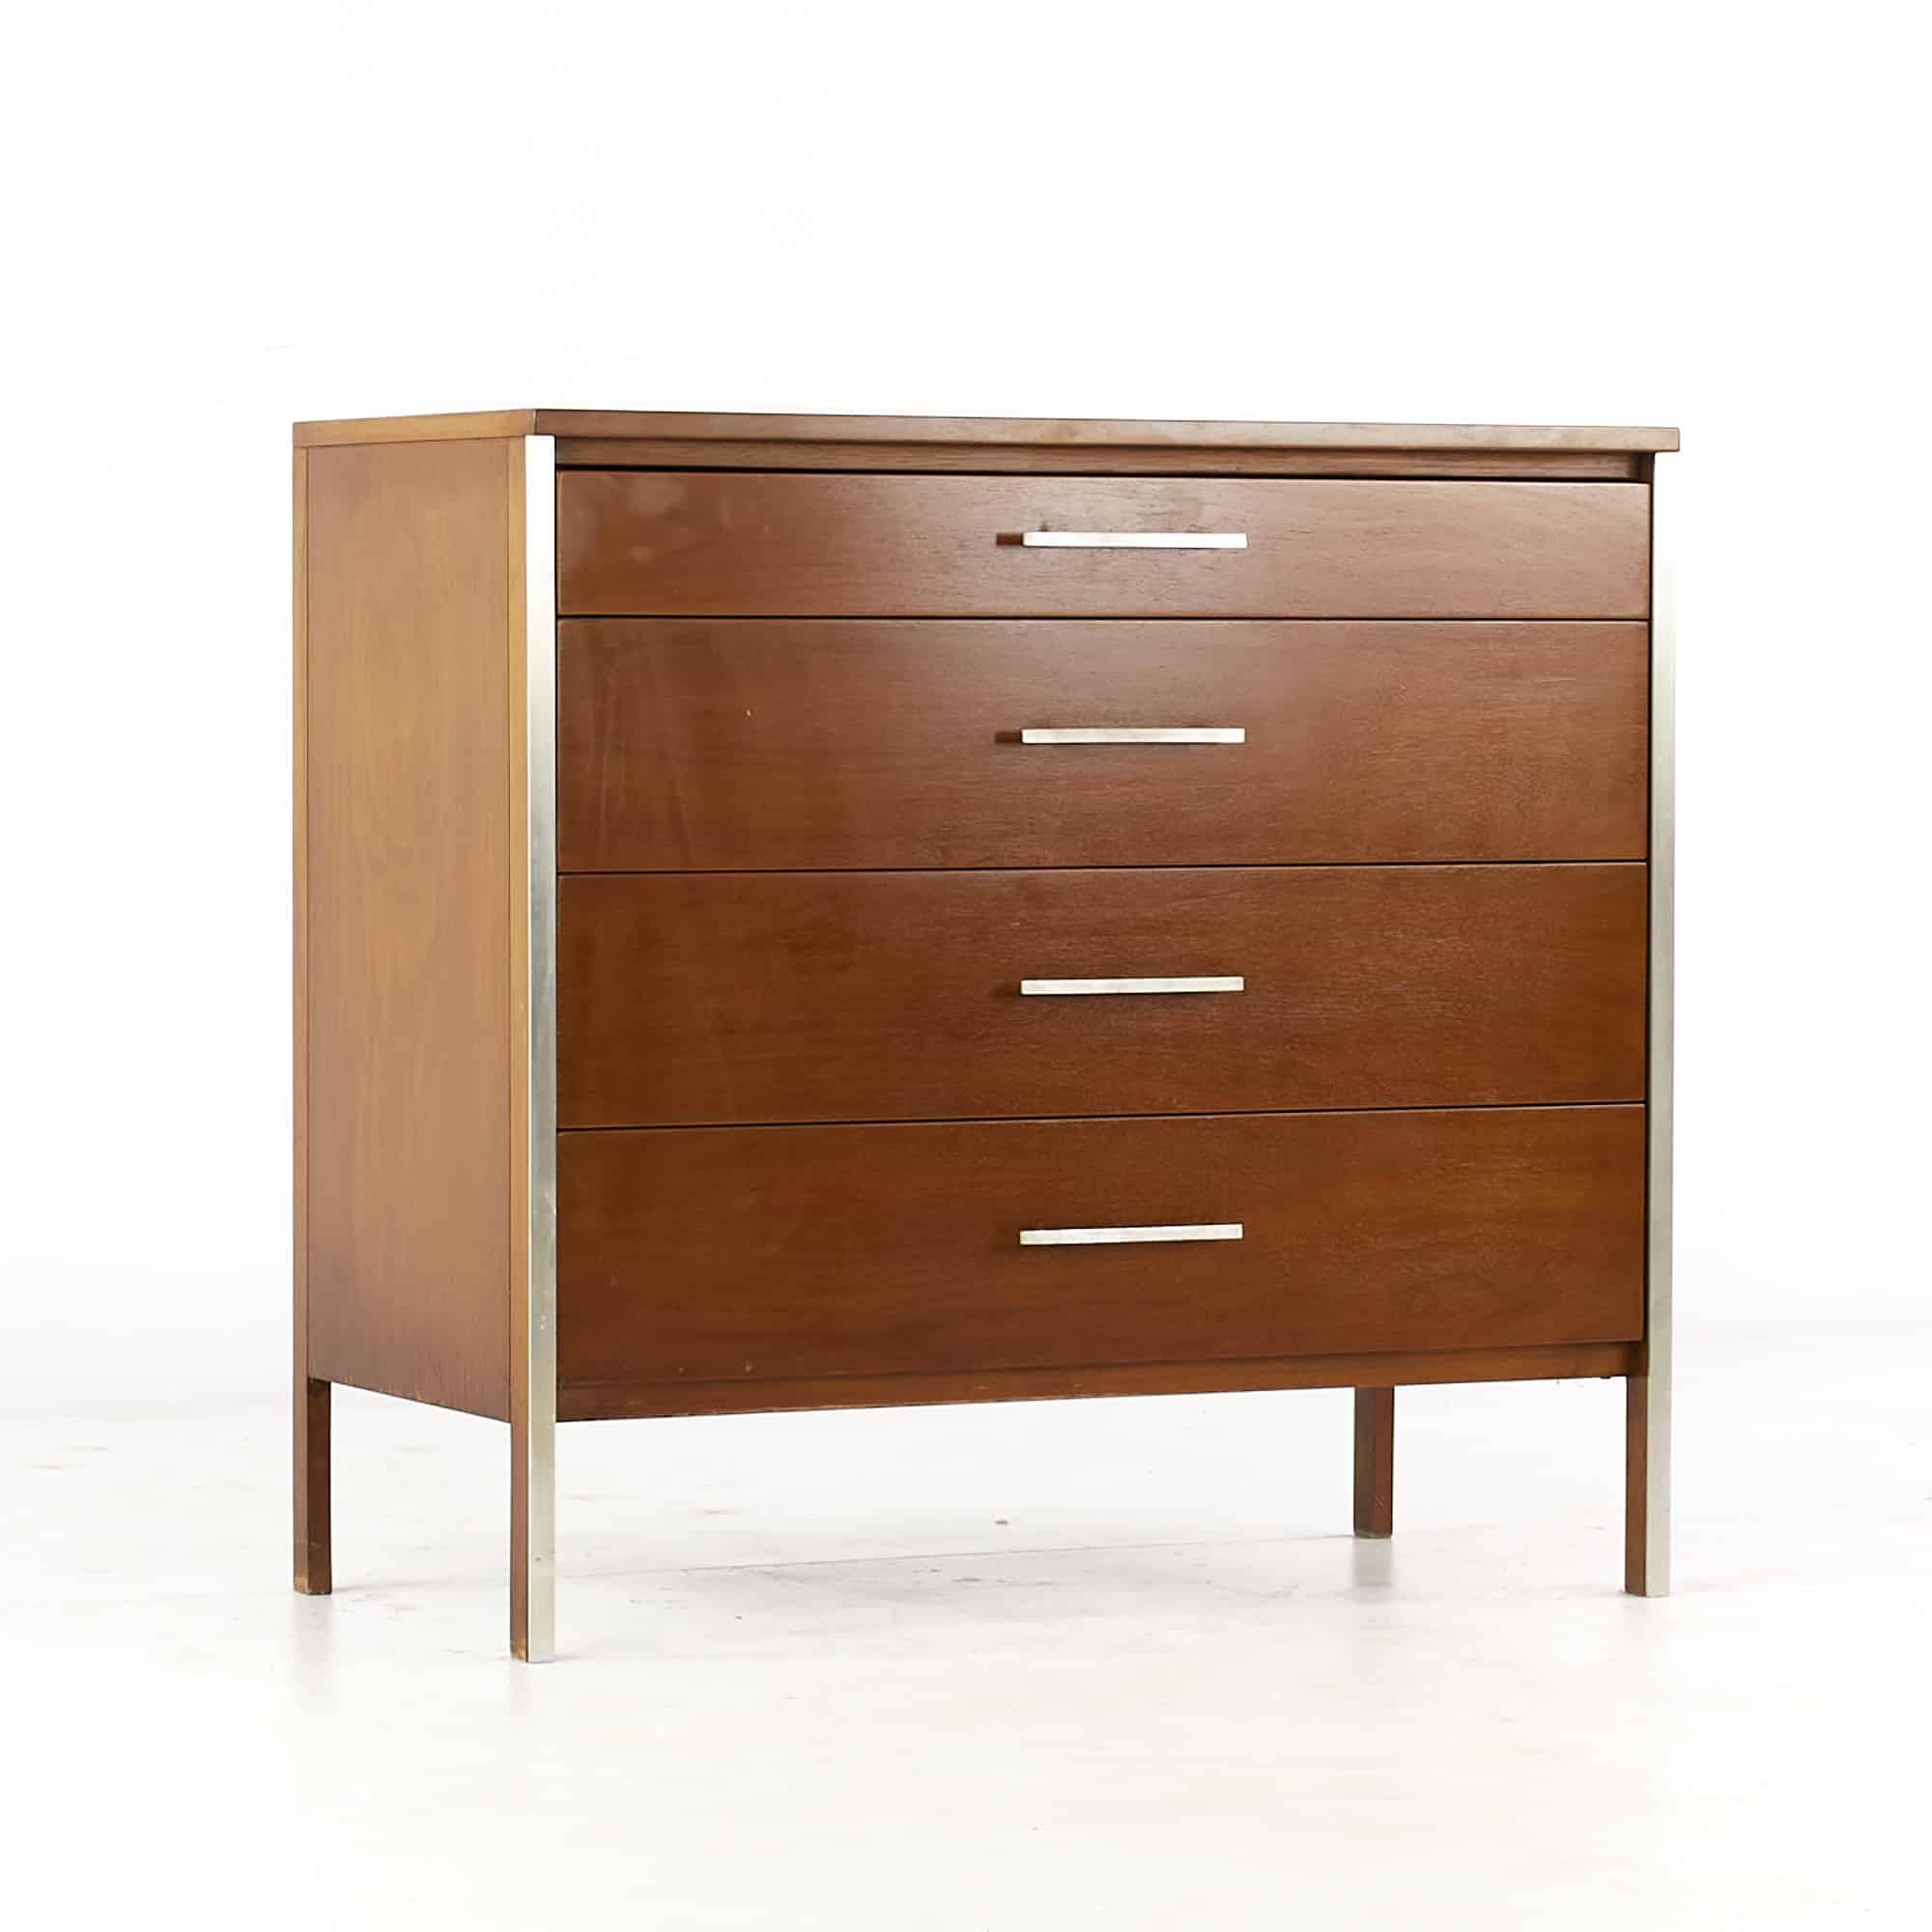 Paul Mccobb for Calvin Linear Mid Century Walnut and Stainless Steel 4 Drawer Chest of Drawers Dresser